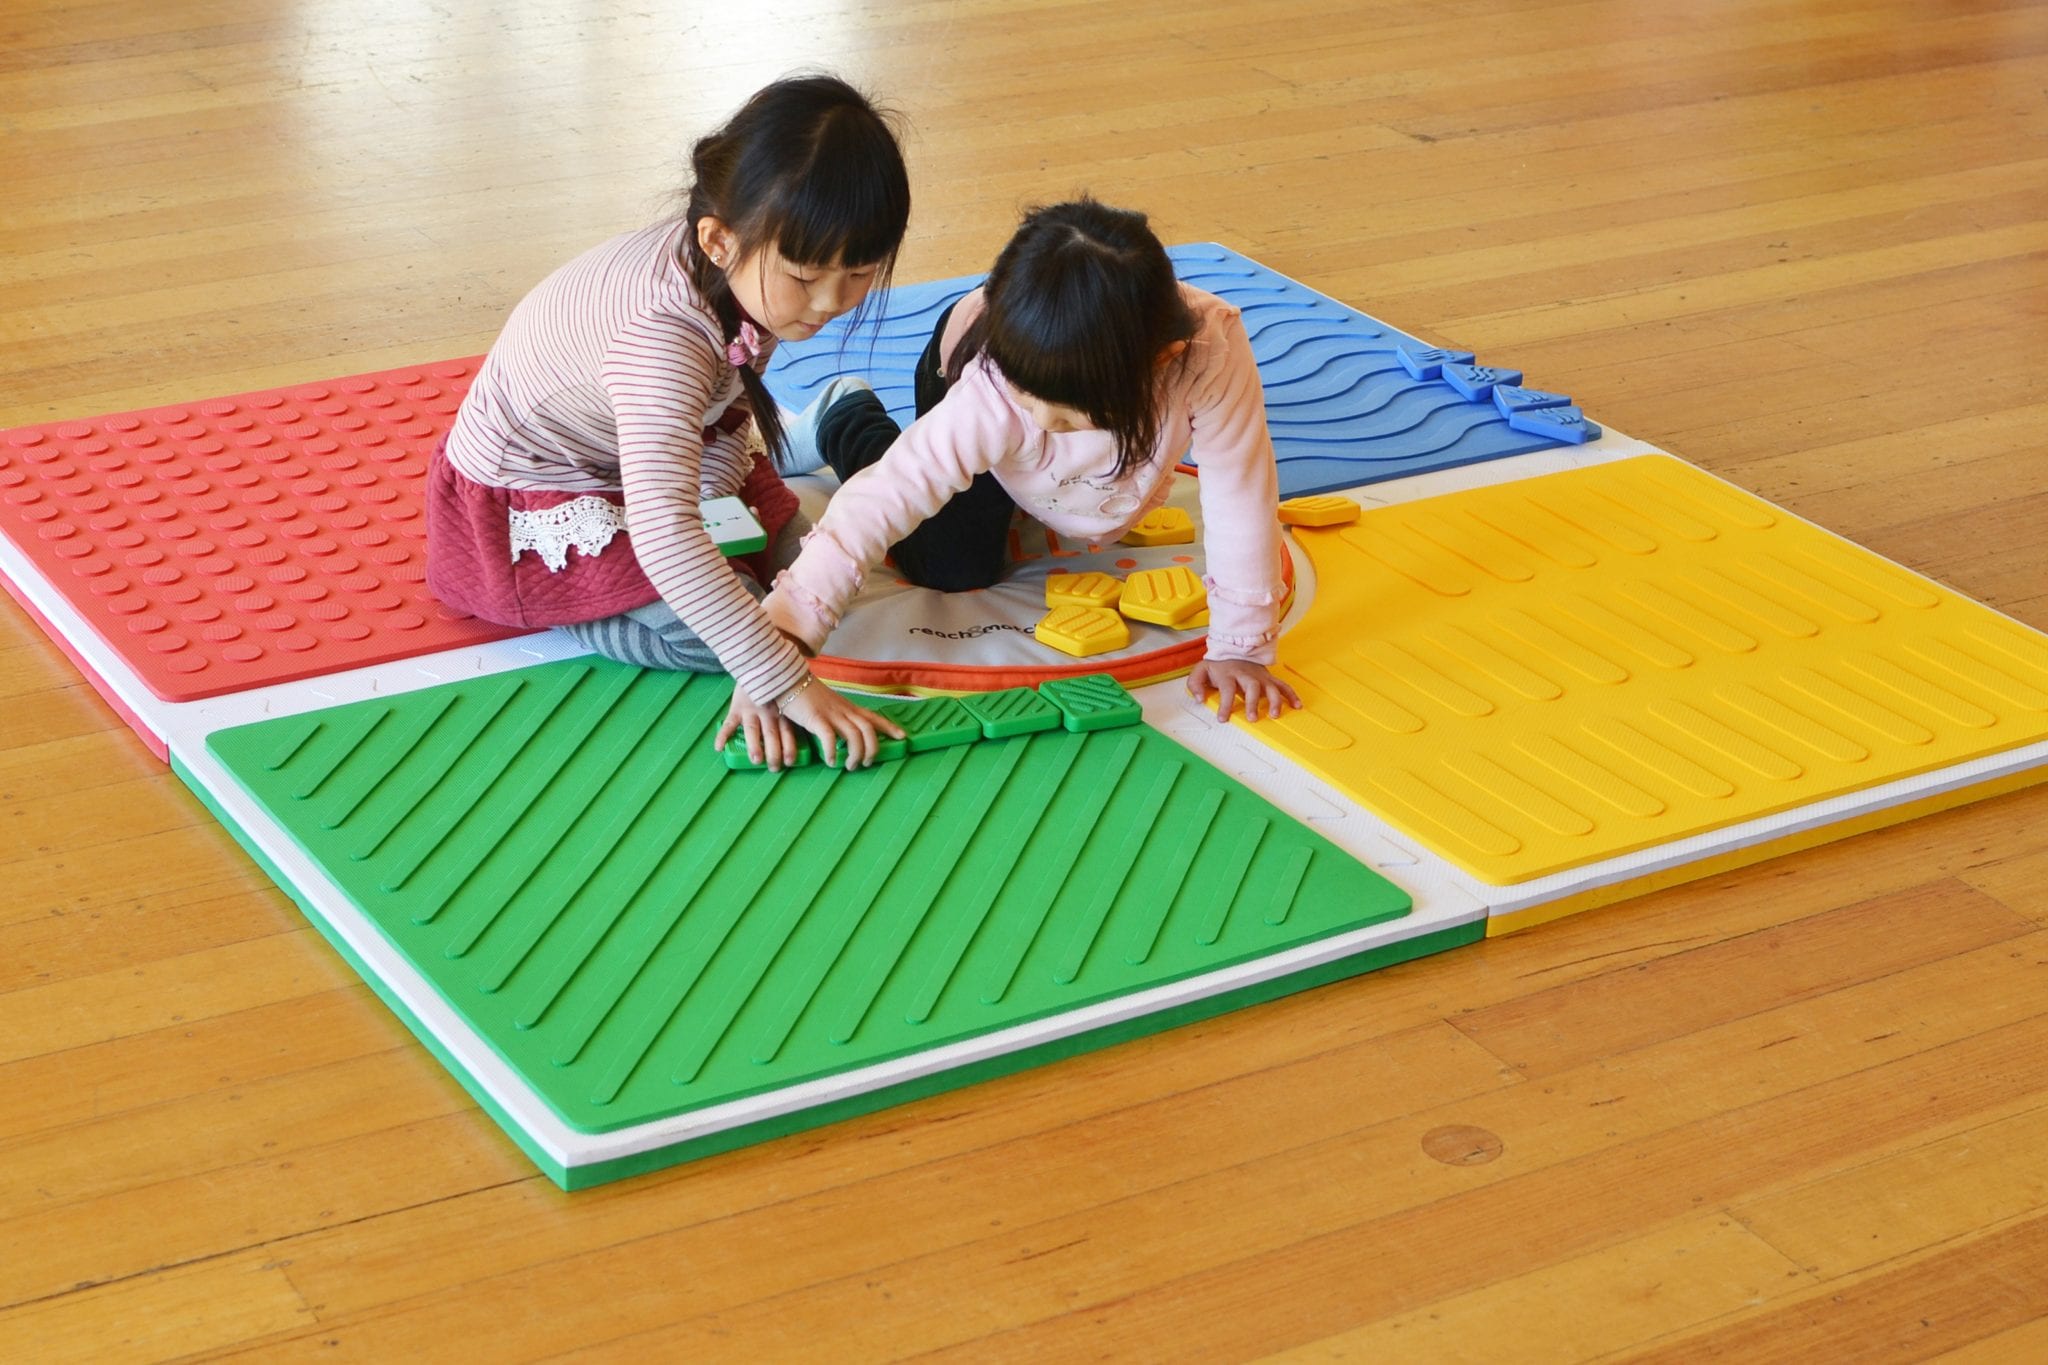 Two young girls playing on Reach & Match mat